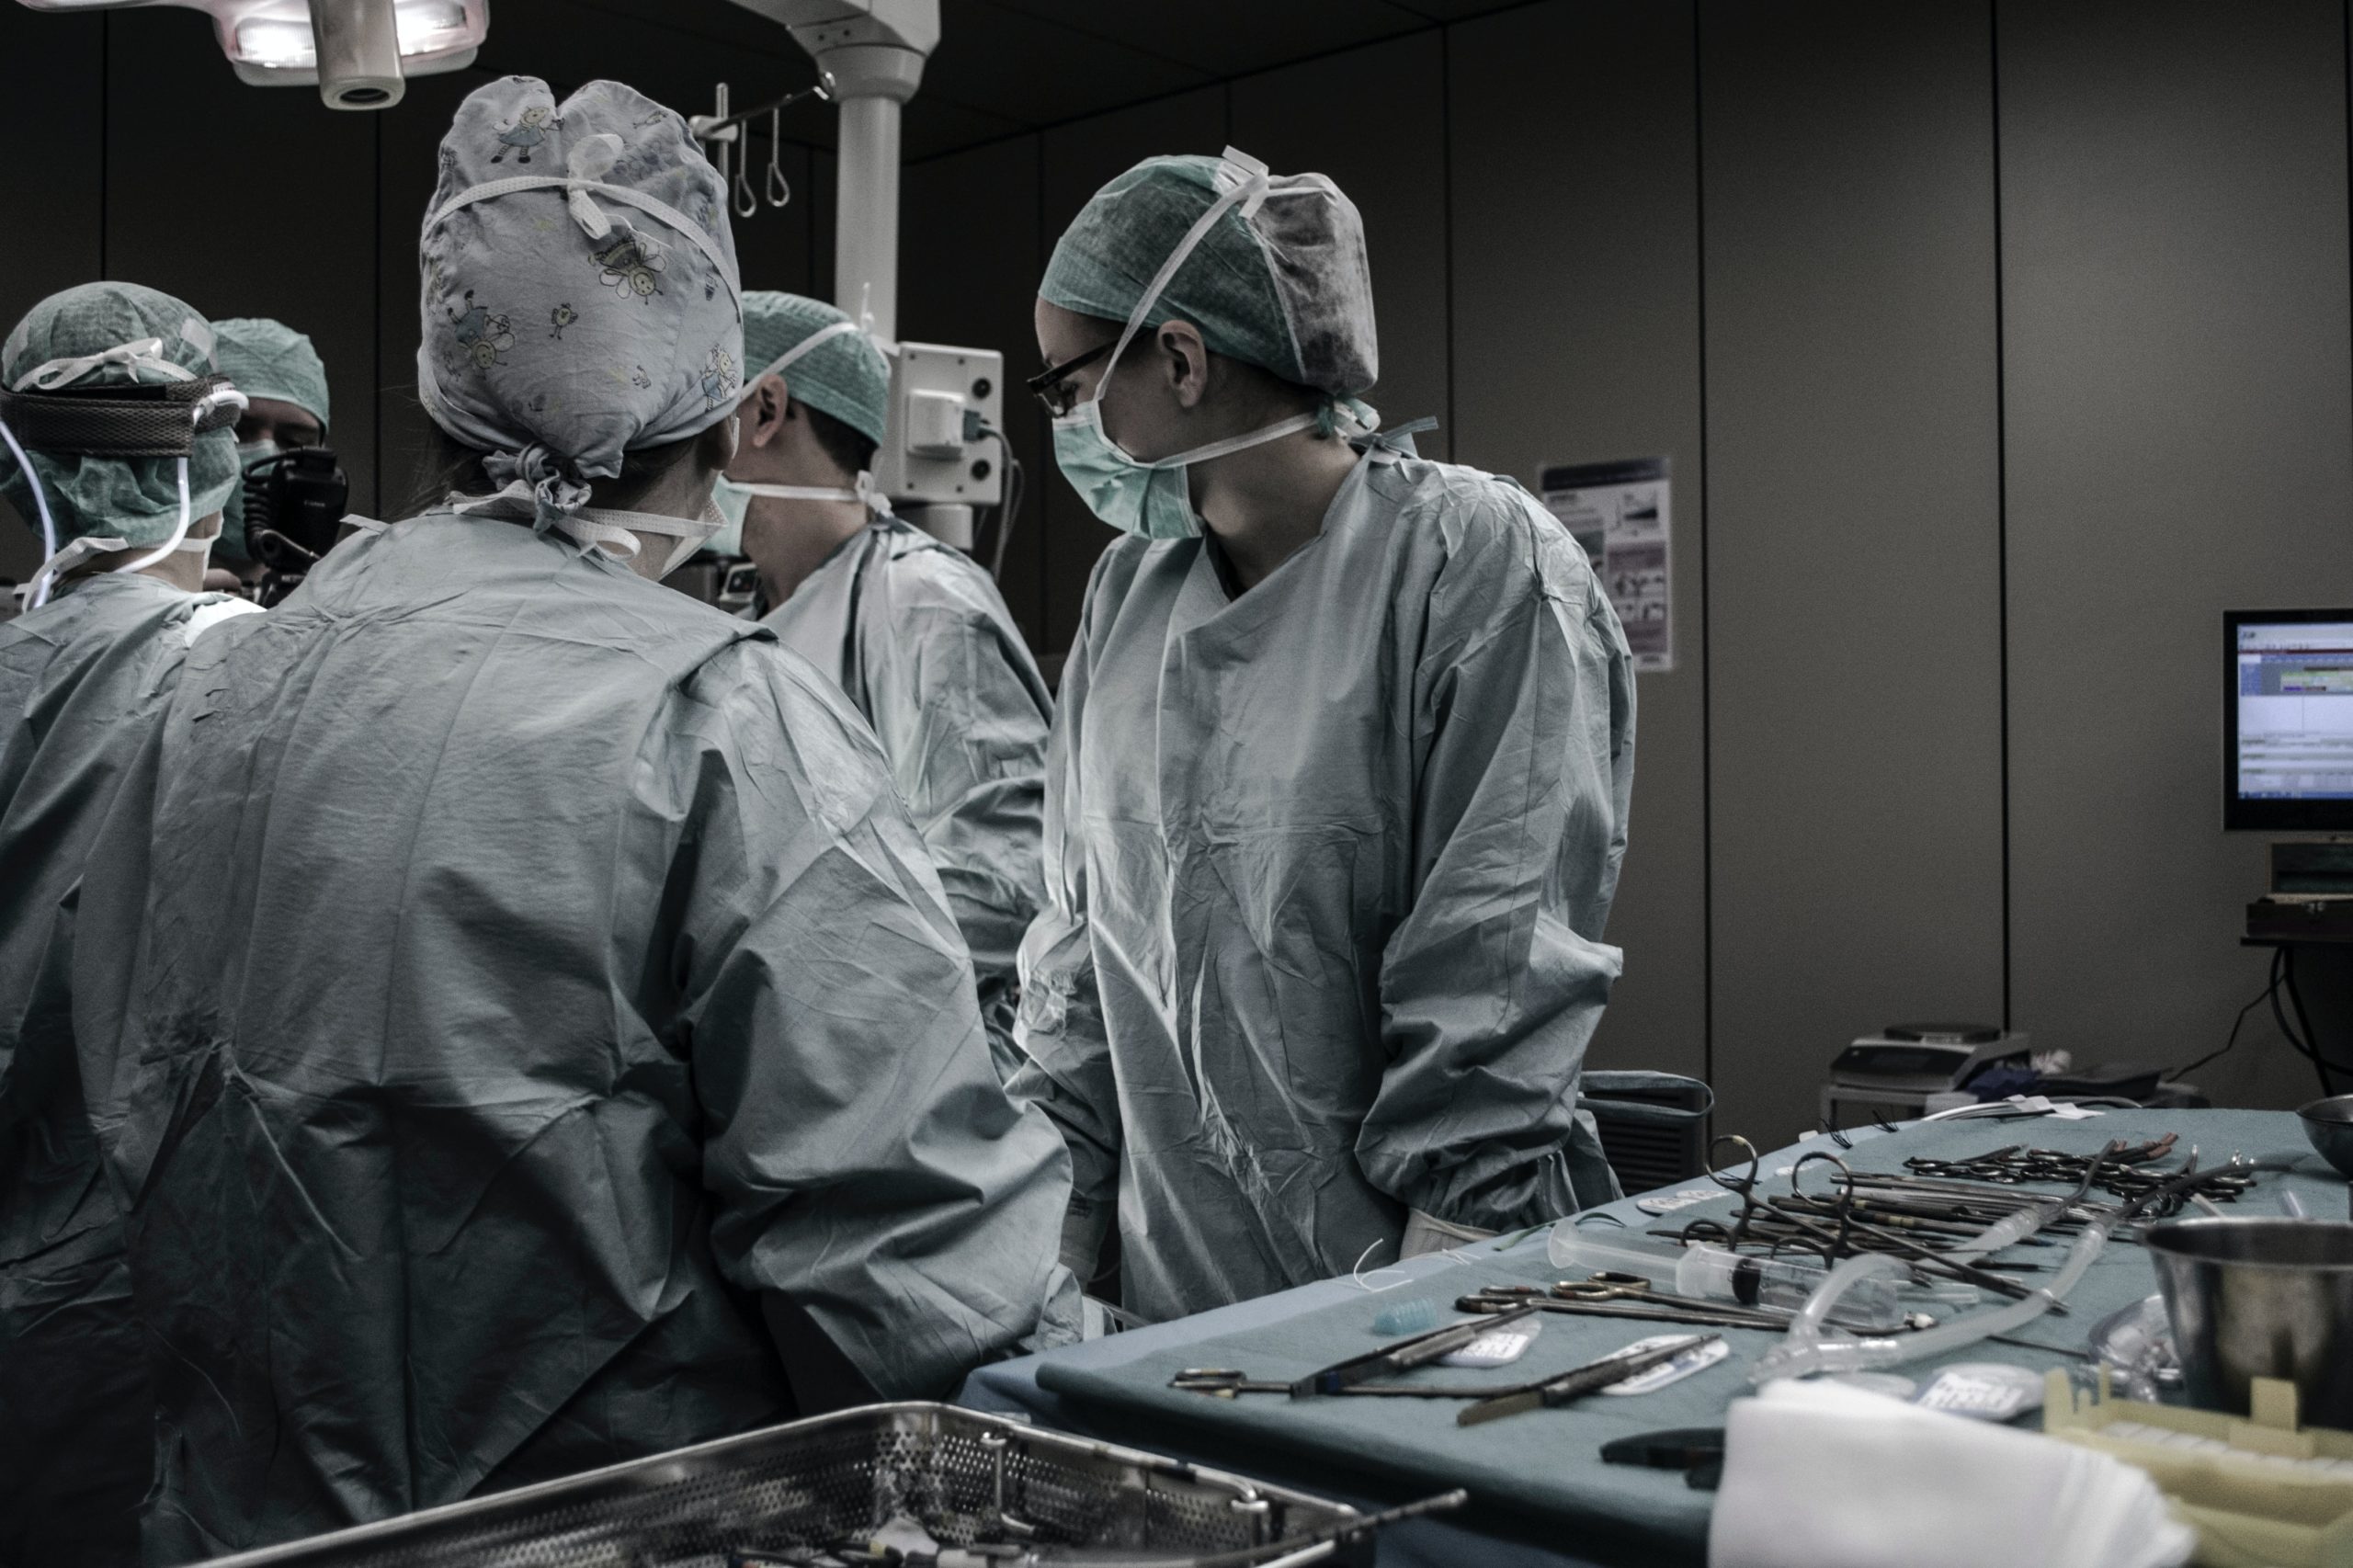 A group of medical professionals perform surgery